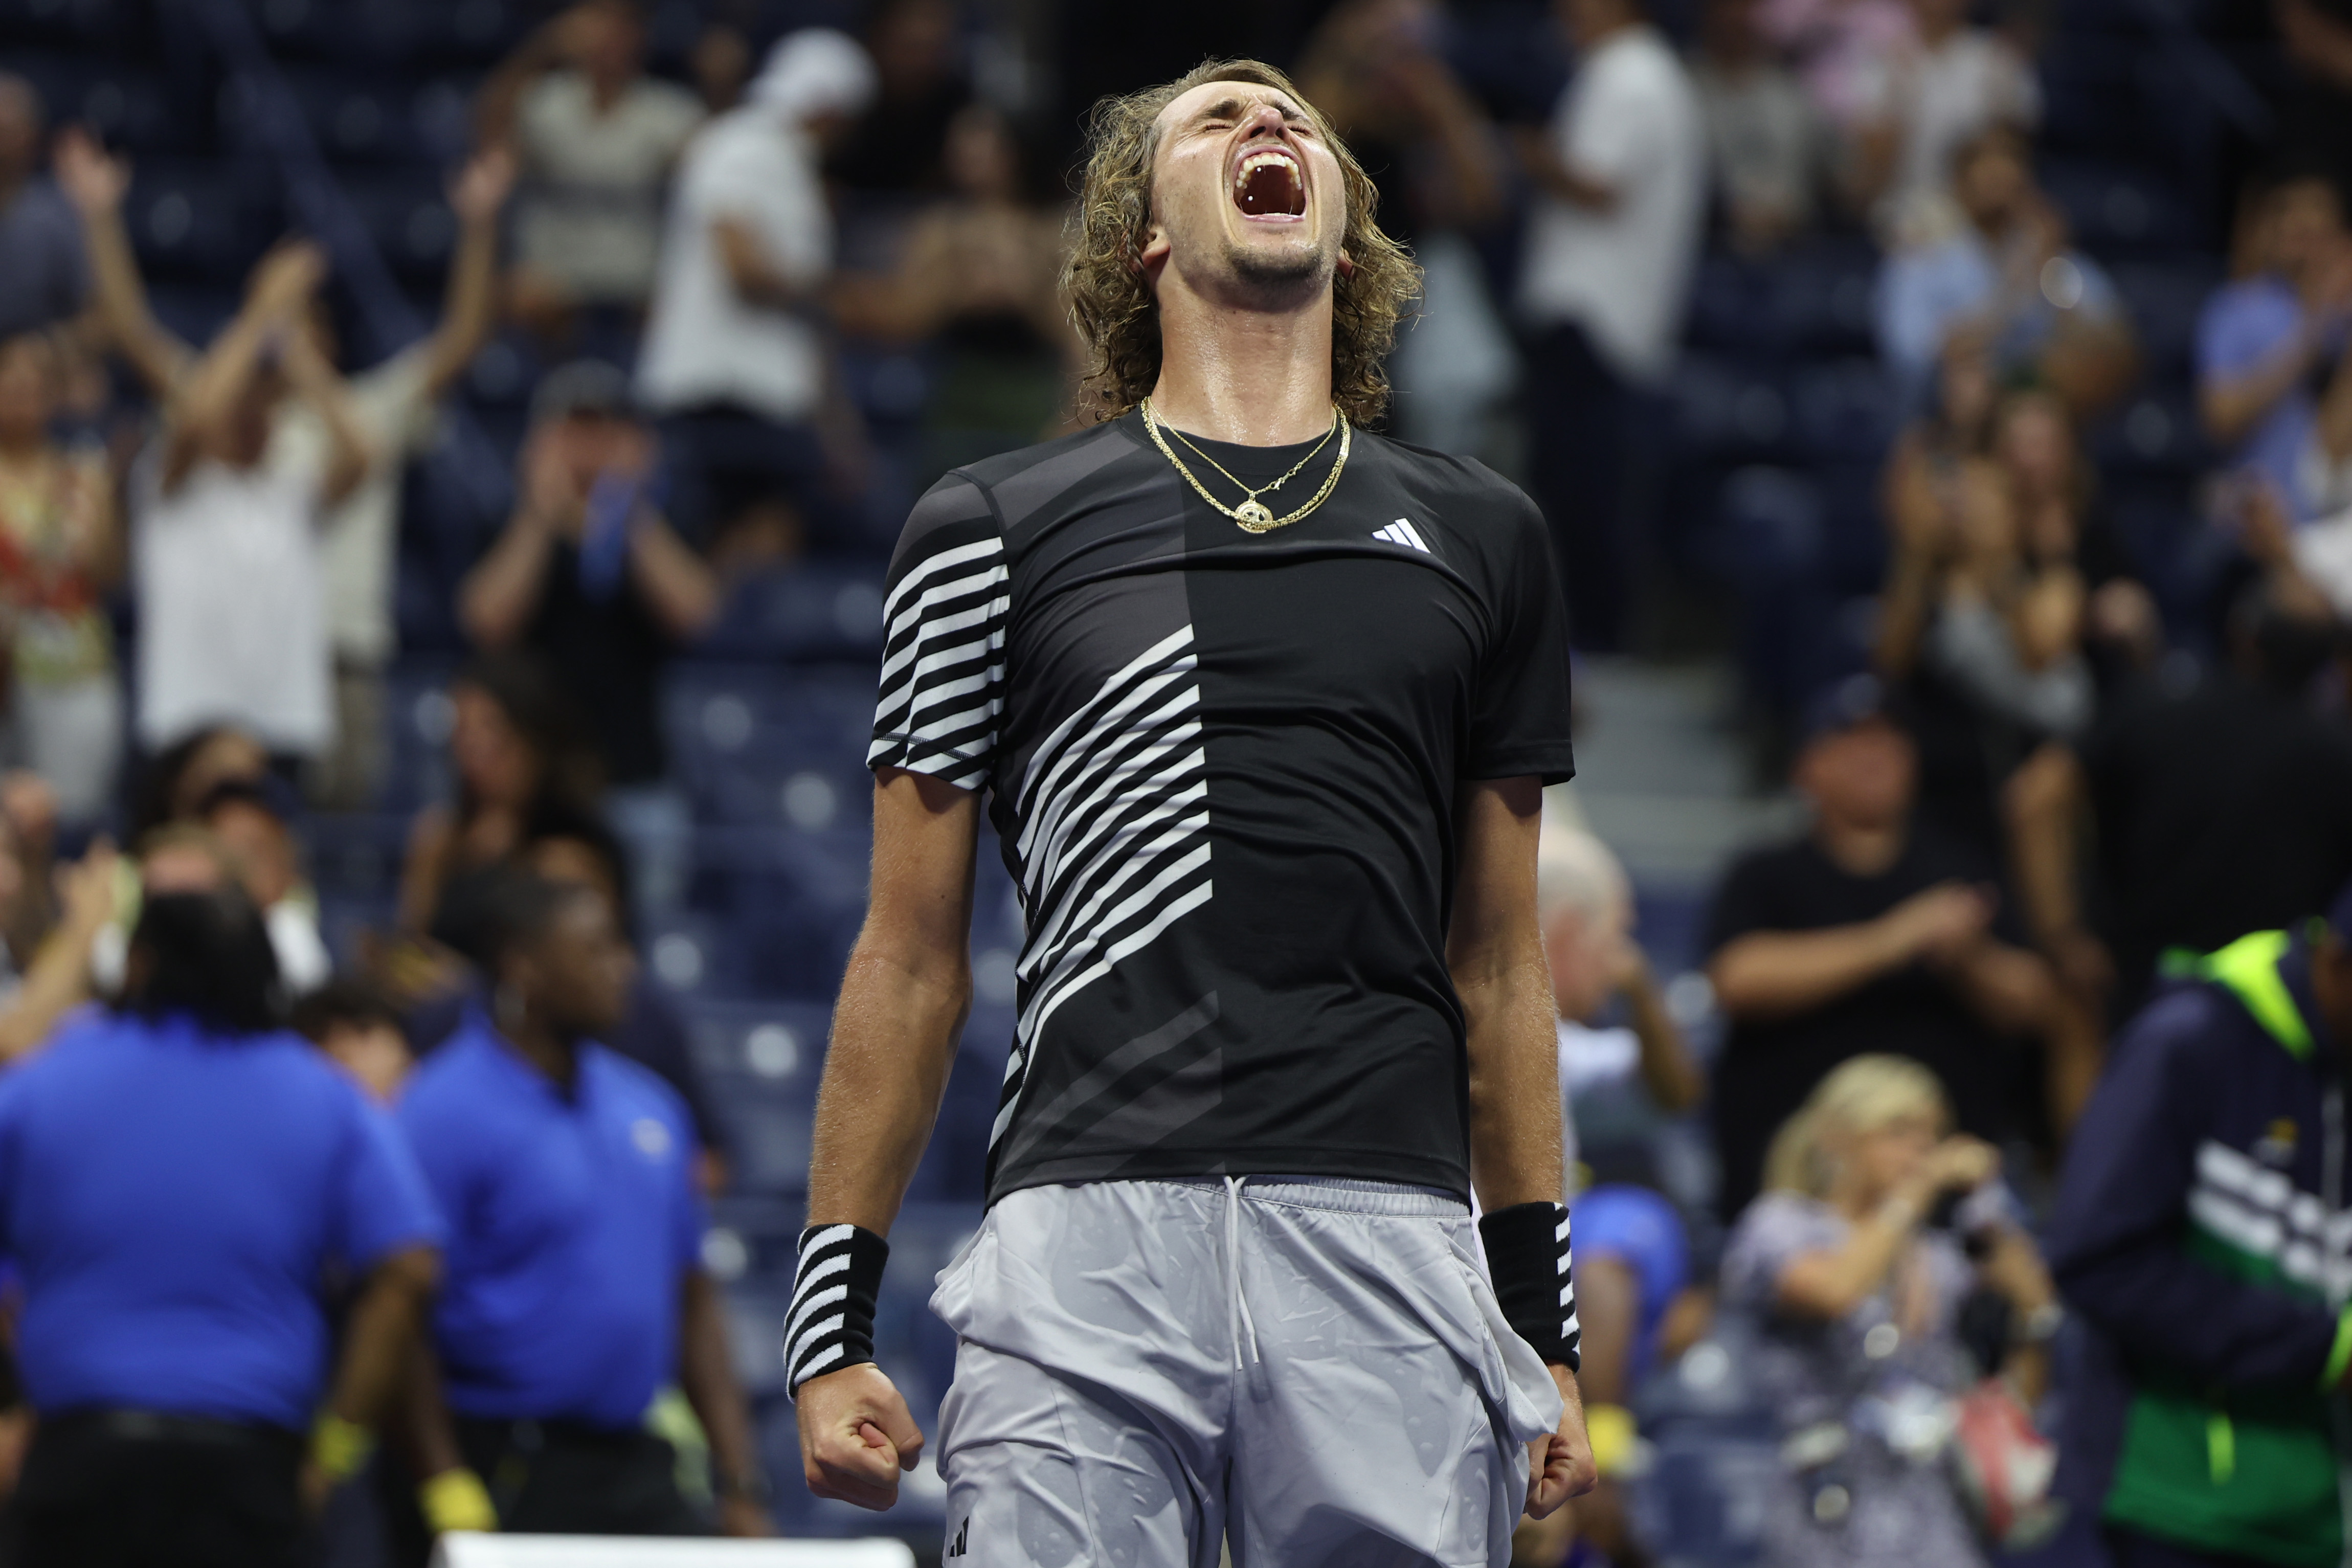 Alexander Zverev outlasts Jannik Sinner in nearly five hours at 130 A.M for cathartic US Open triumph